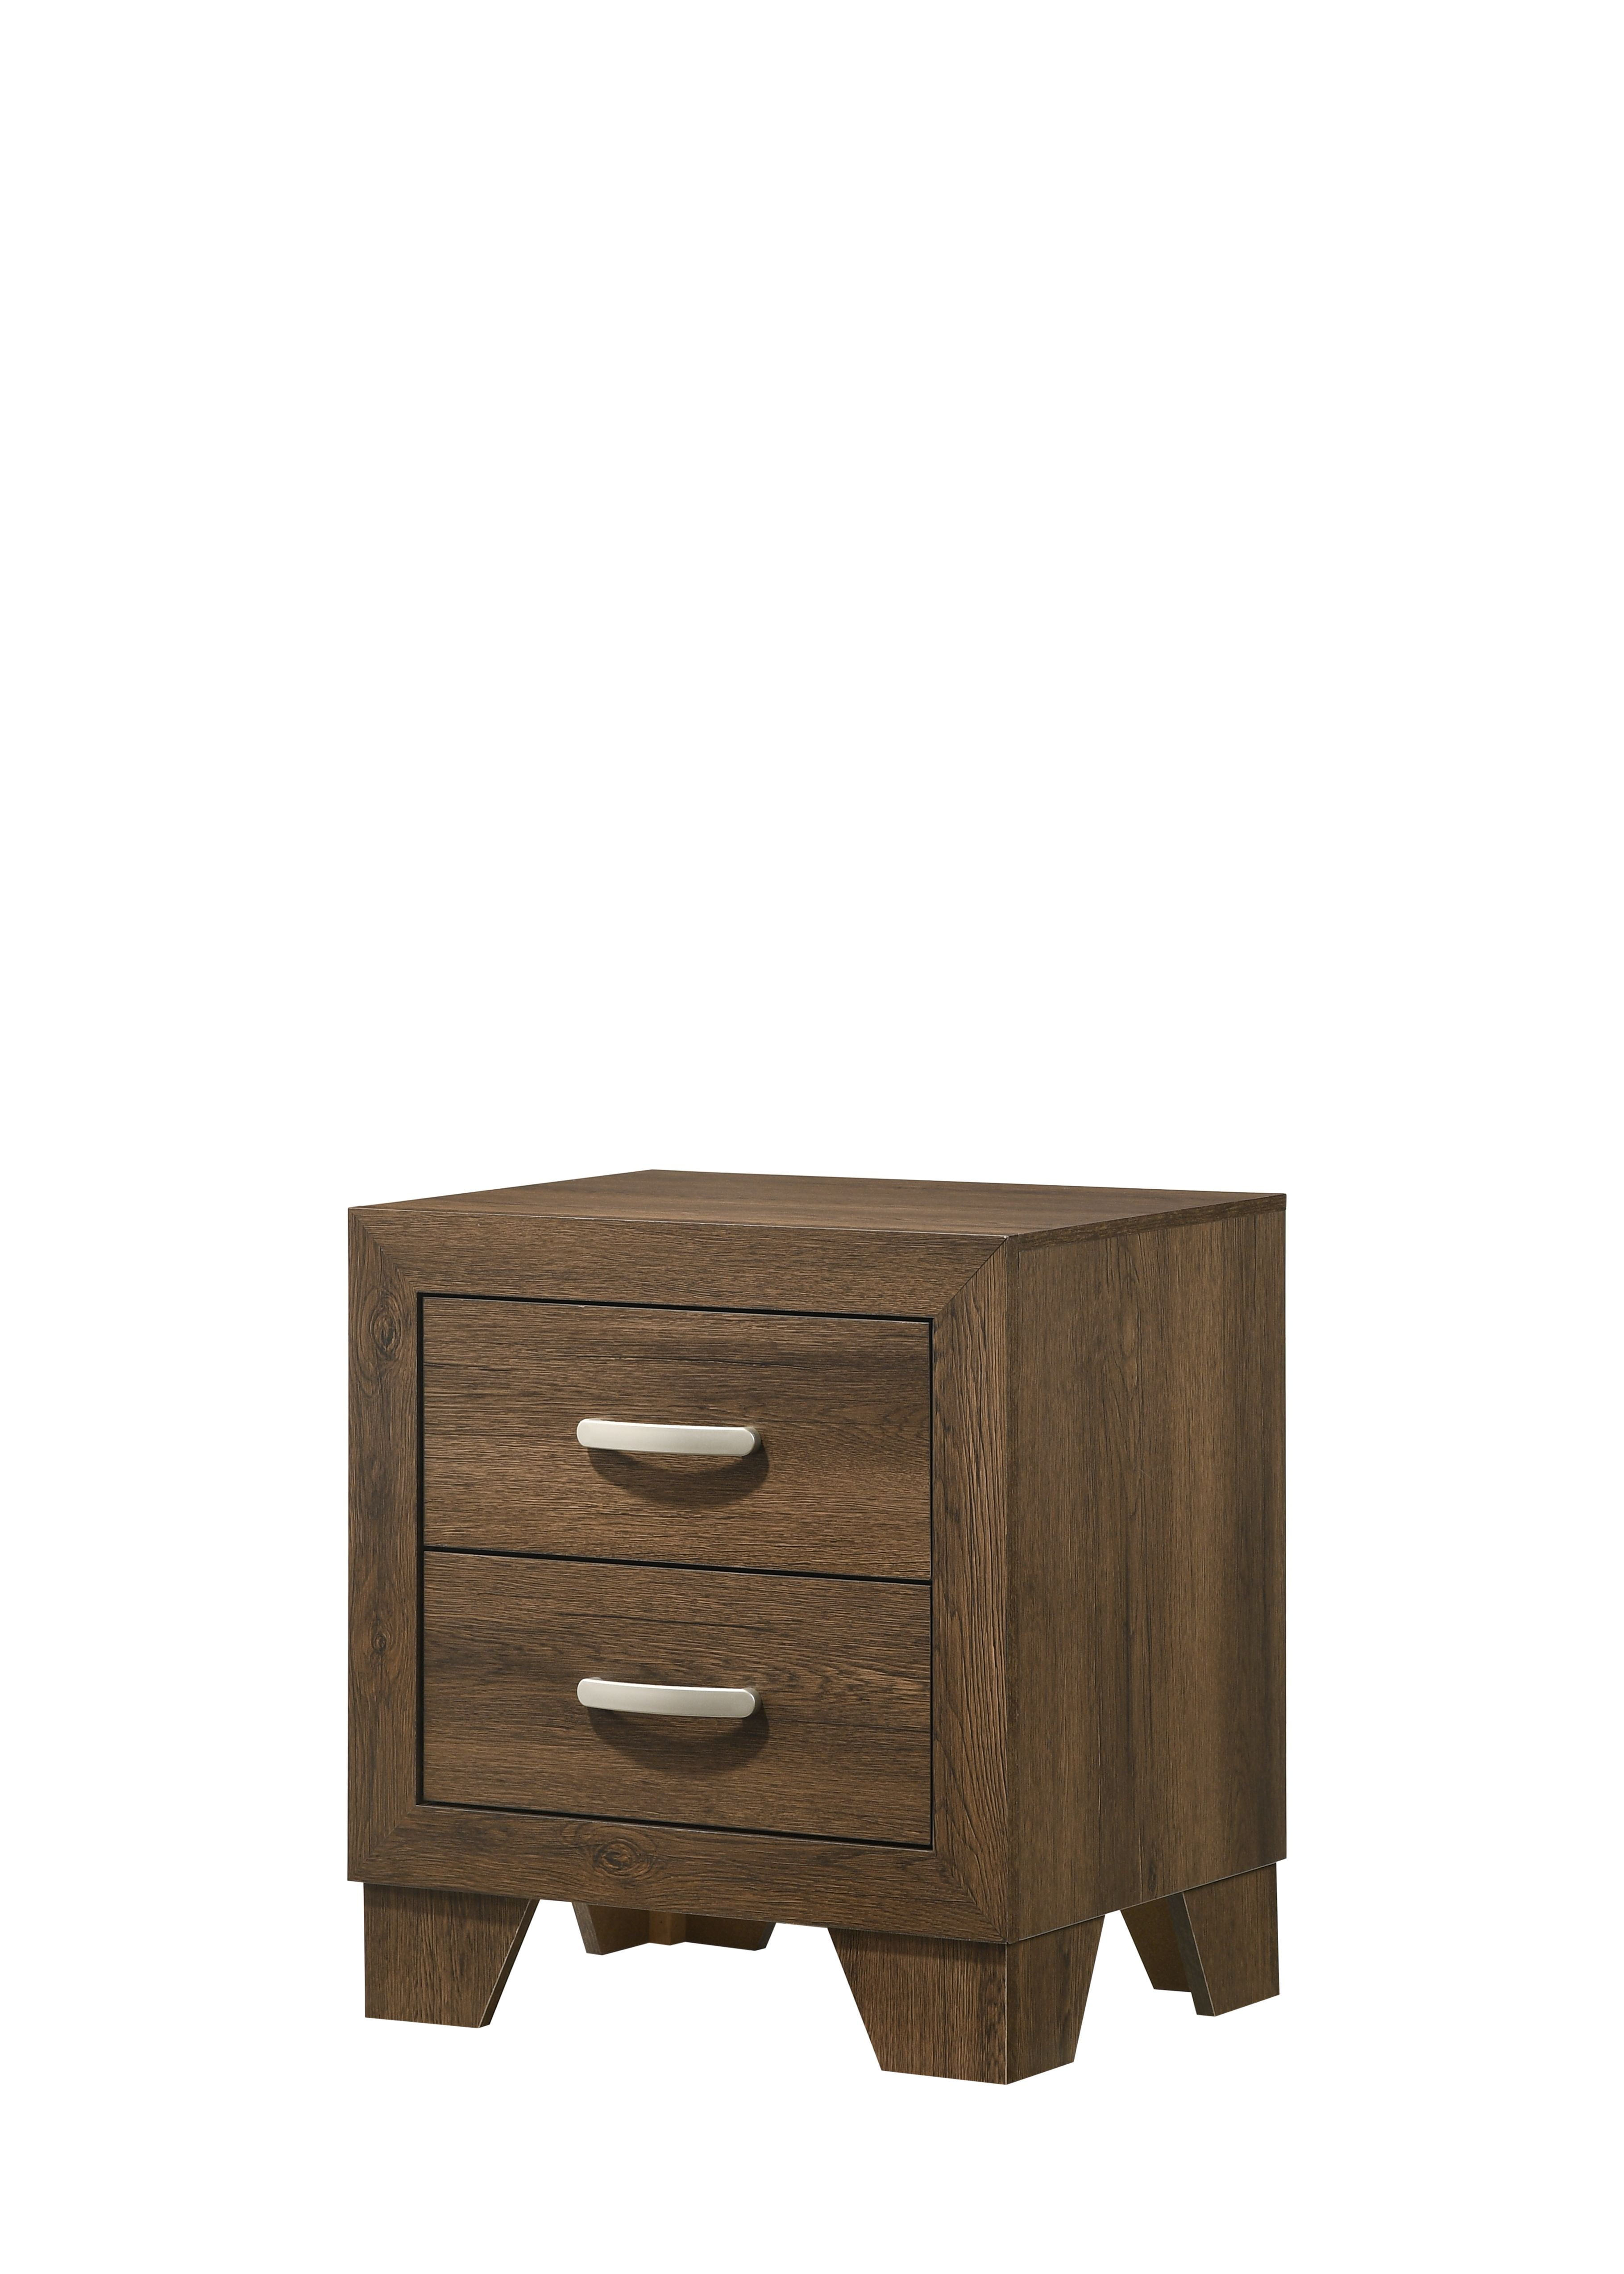 Details about   Bedside Drawers